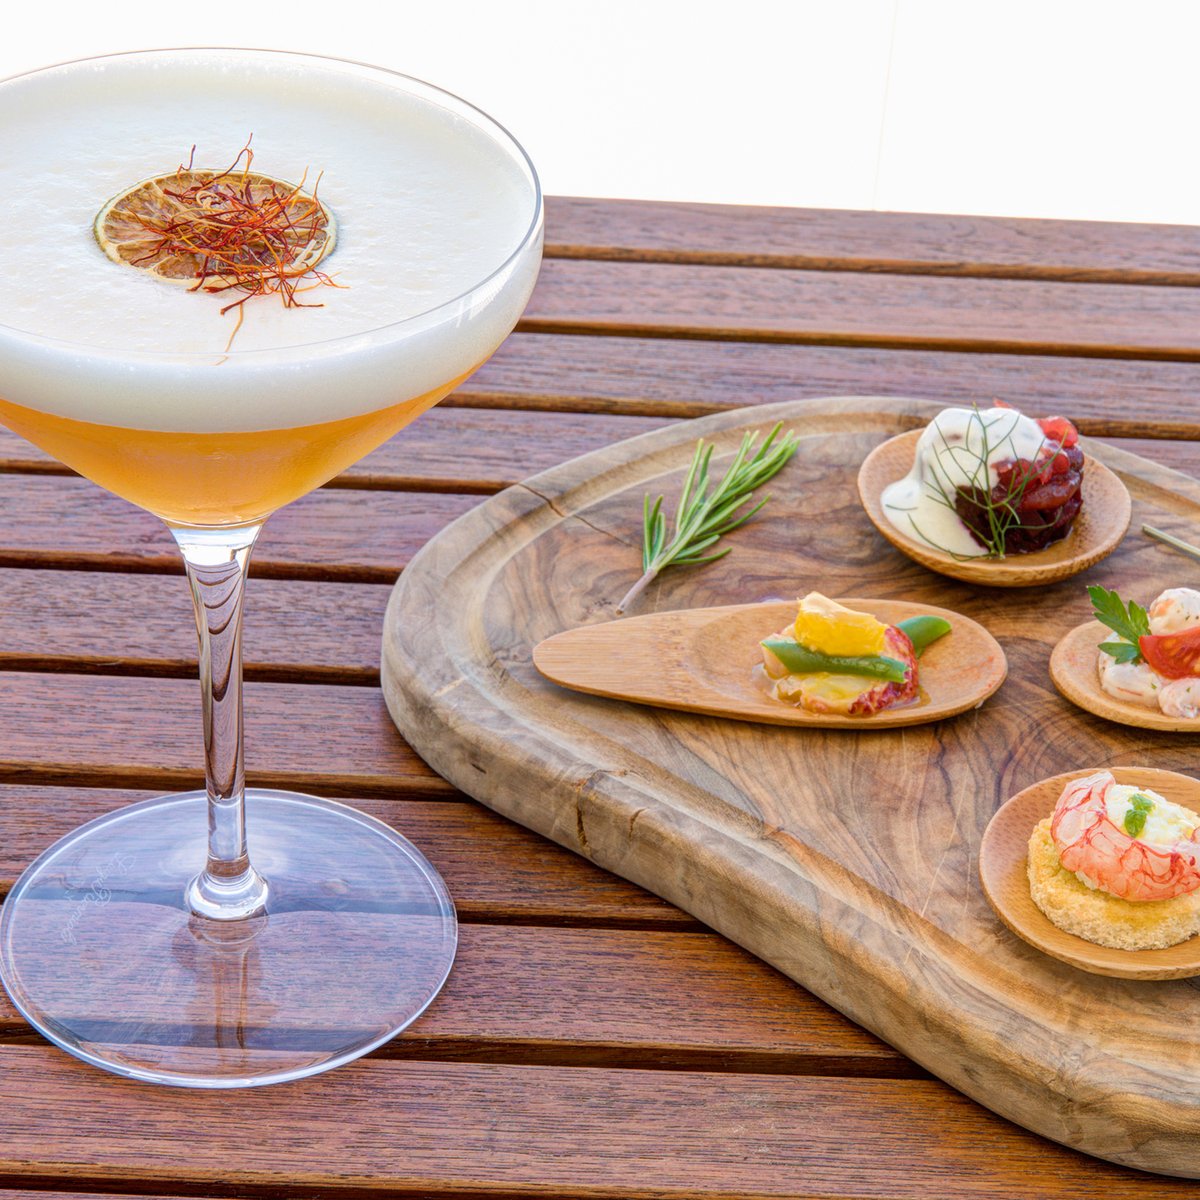 End a perfectly-relaxing day with a signature cocktail and creative SIcilian tapas. #RoccoForteHotels #RoccoForte #Sicily #VerduraResort